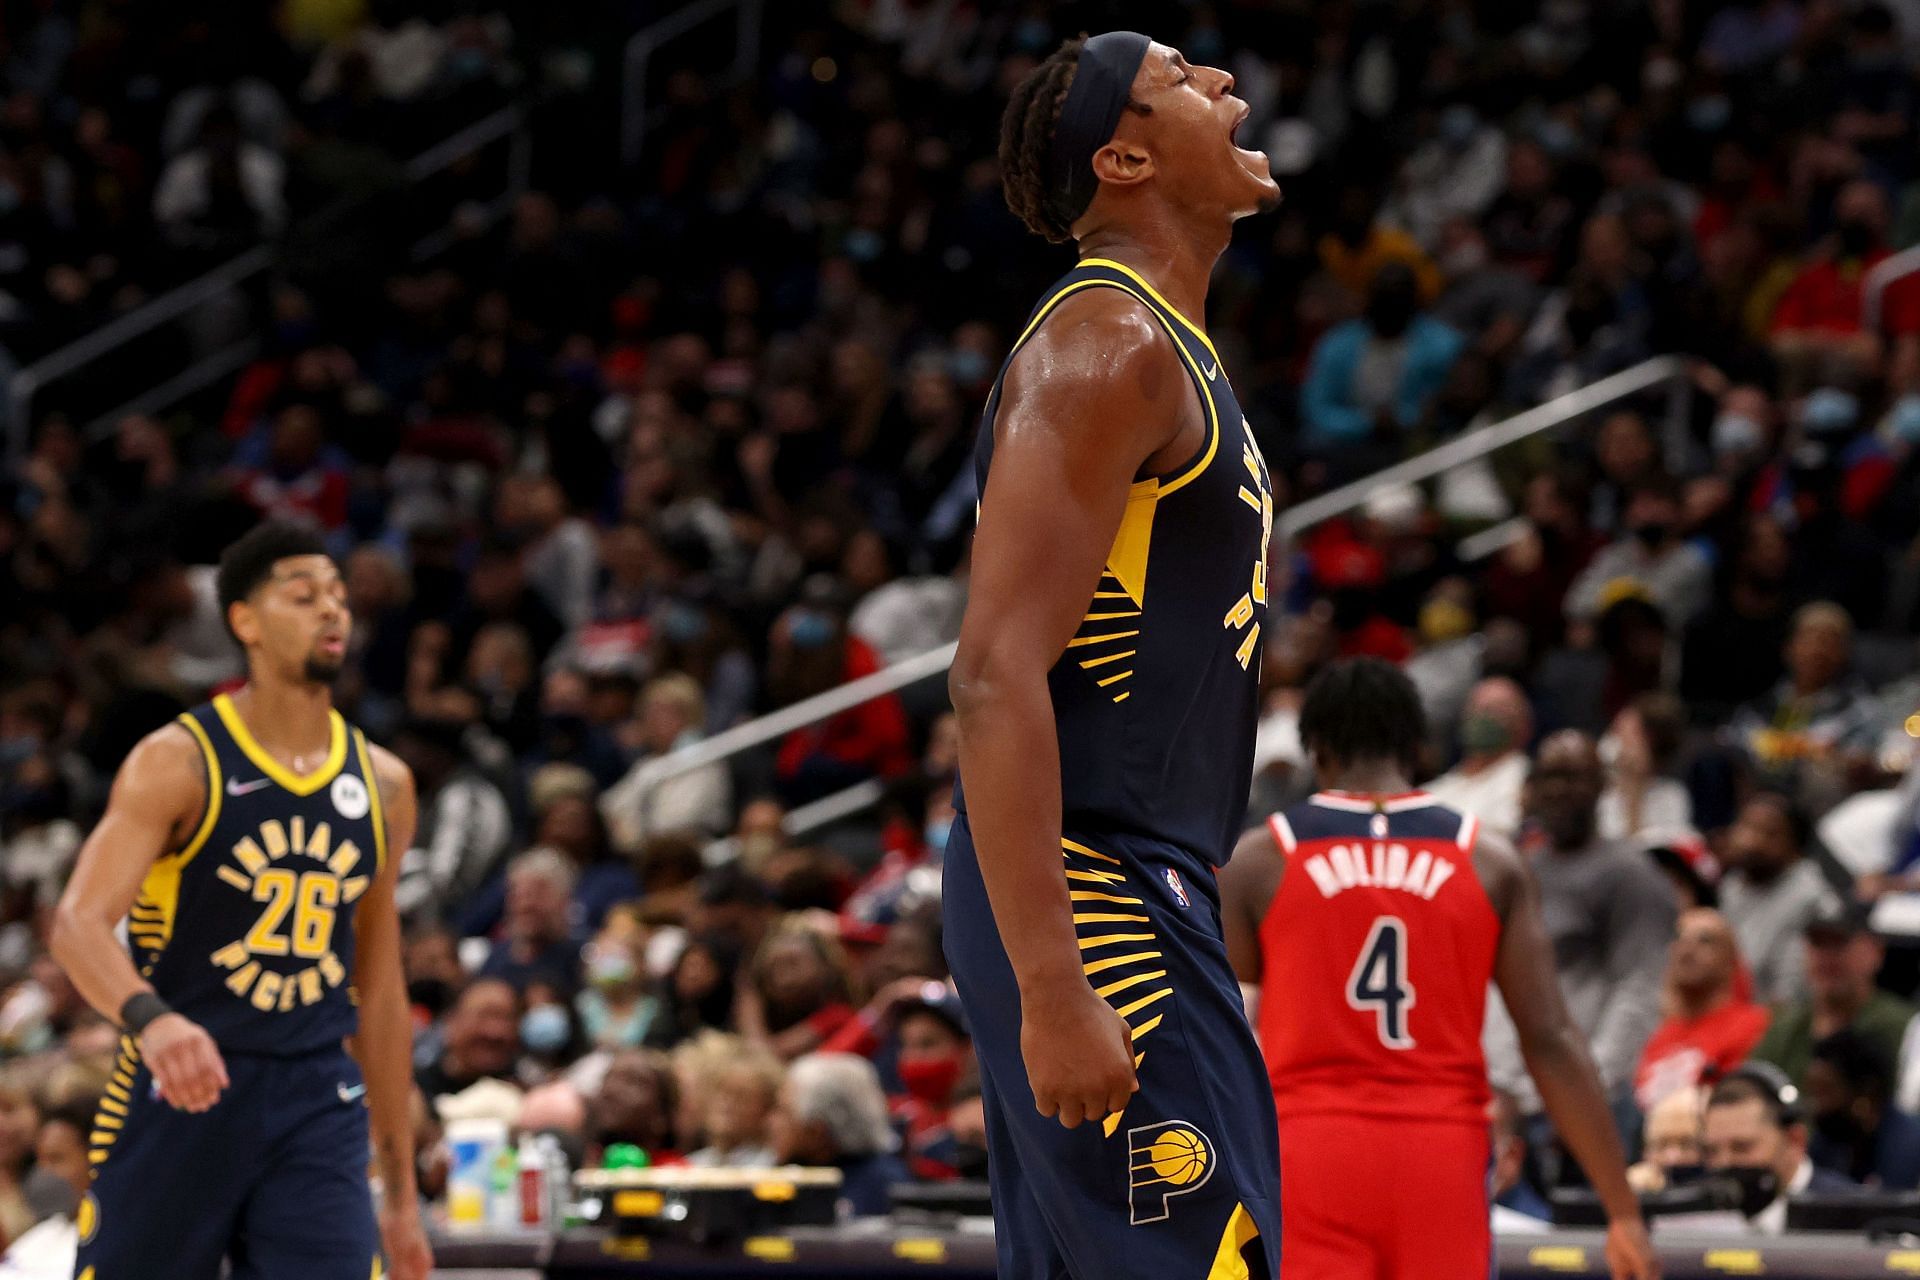 The Indiana Pacers celebrate a play against the Washington Wizards